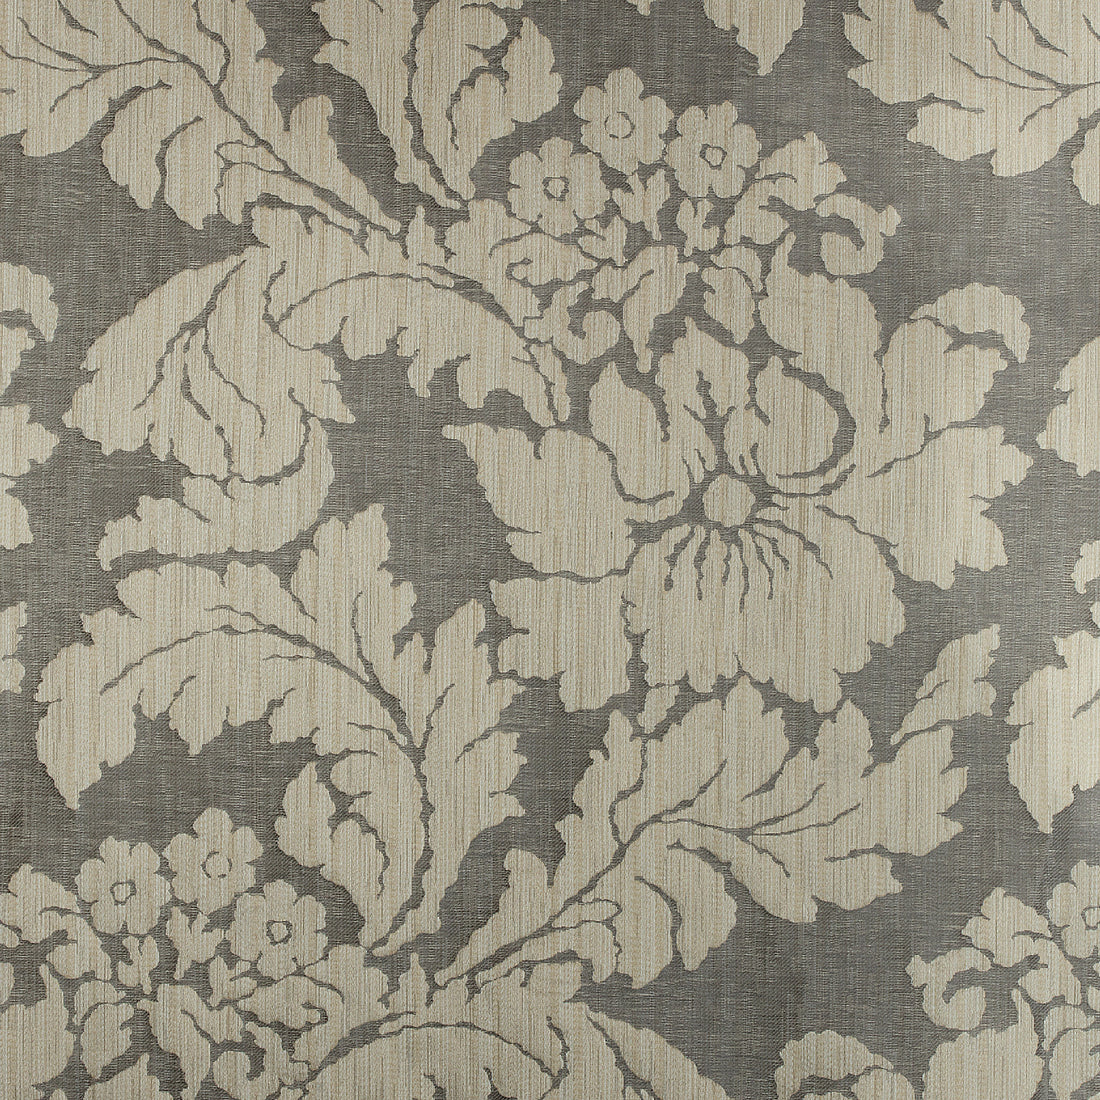 Caserta Damask fabric in taupe color - pattern number AW72979 - by Anna French in the Manor collection